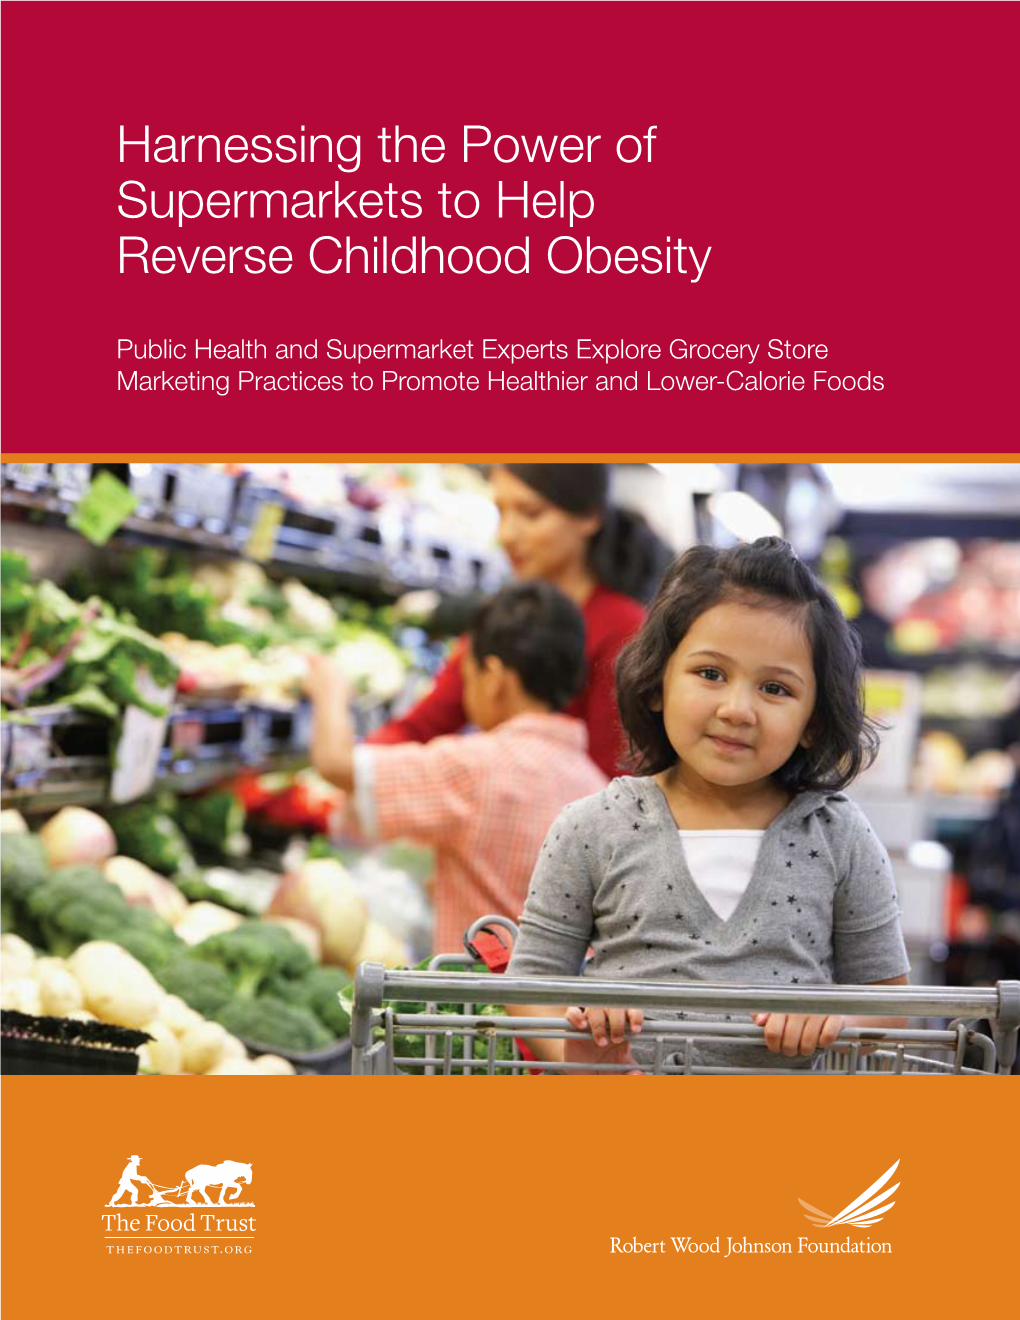 Harnessing the Power of Supermarkets to Help Reverse Childhood Obesity